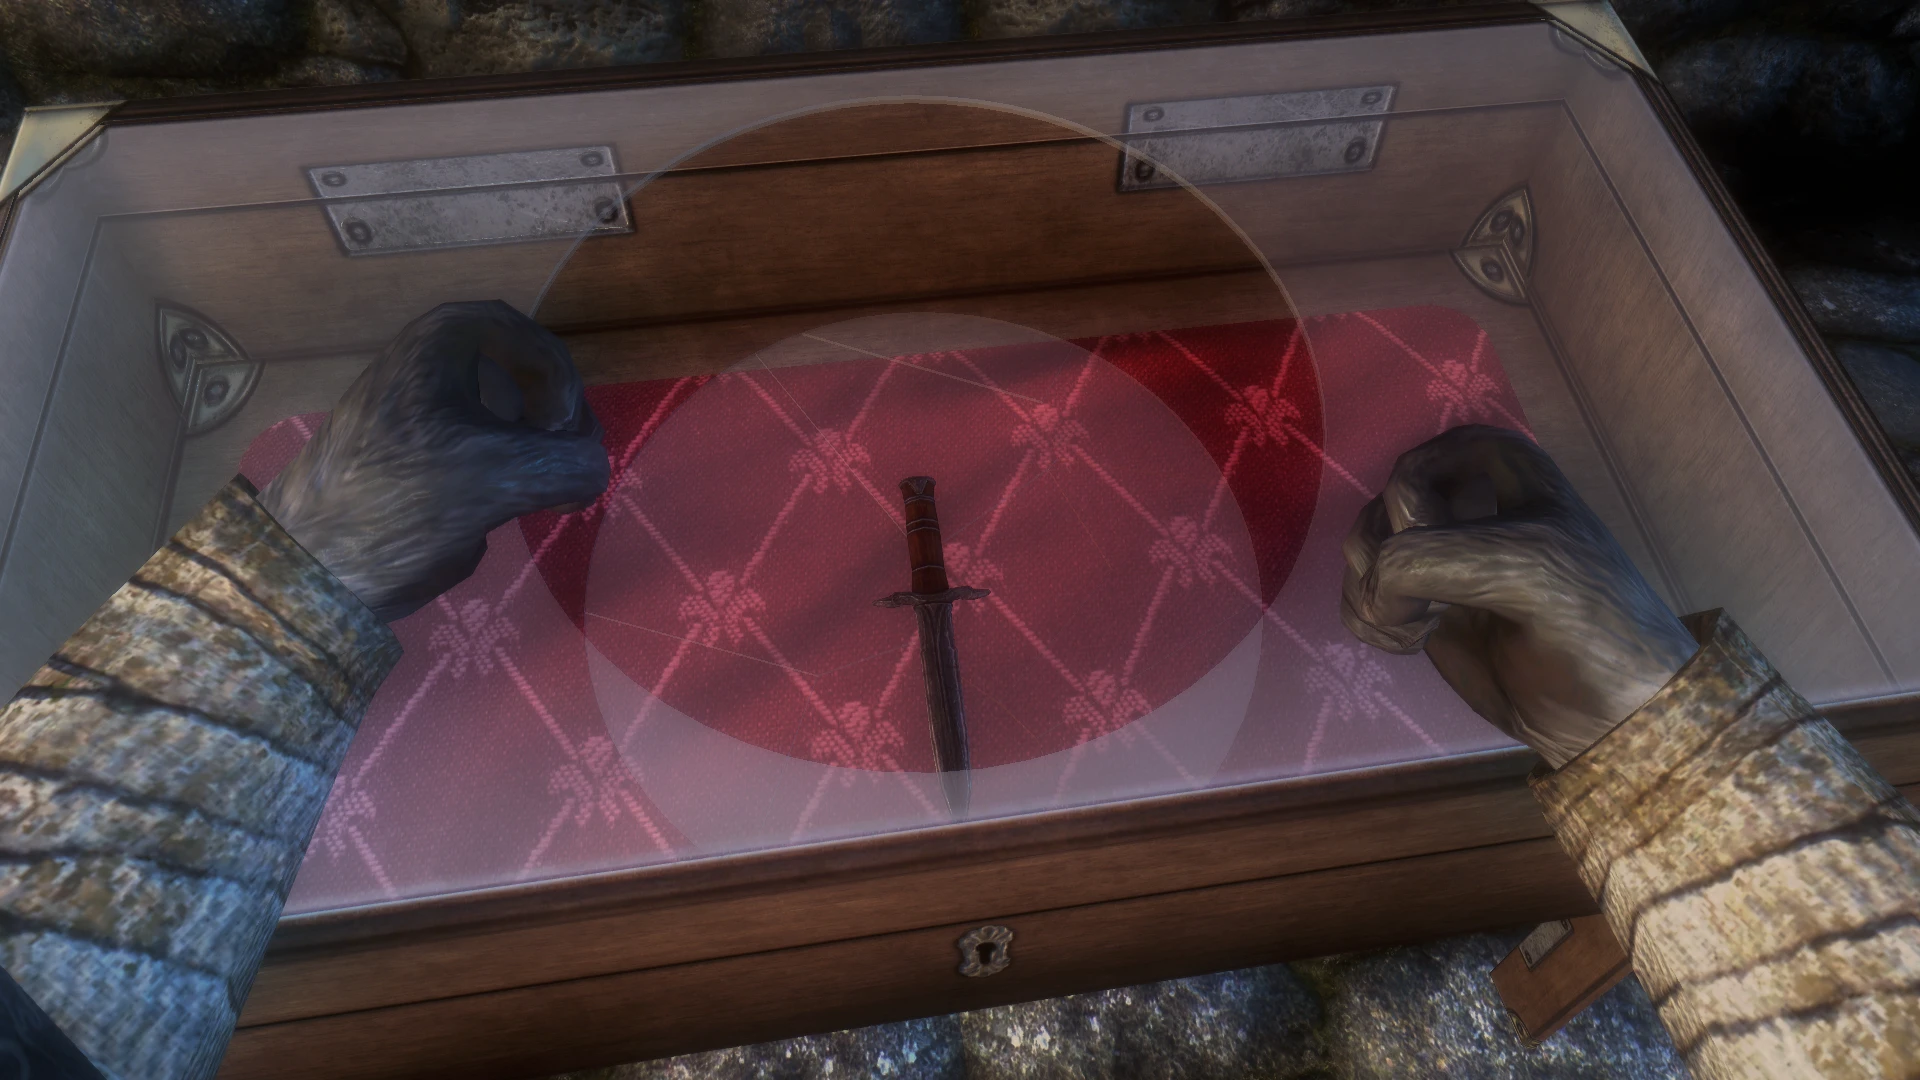 How to use display case skyrim